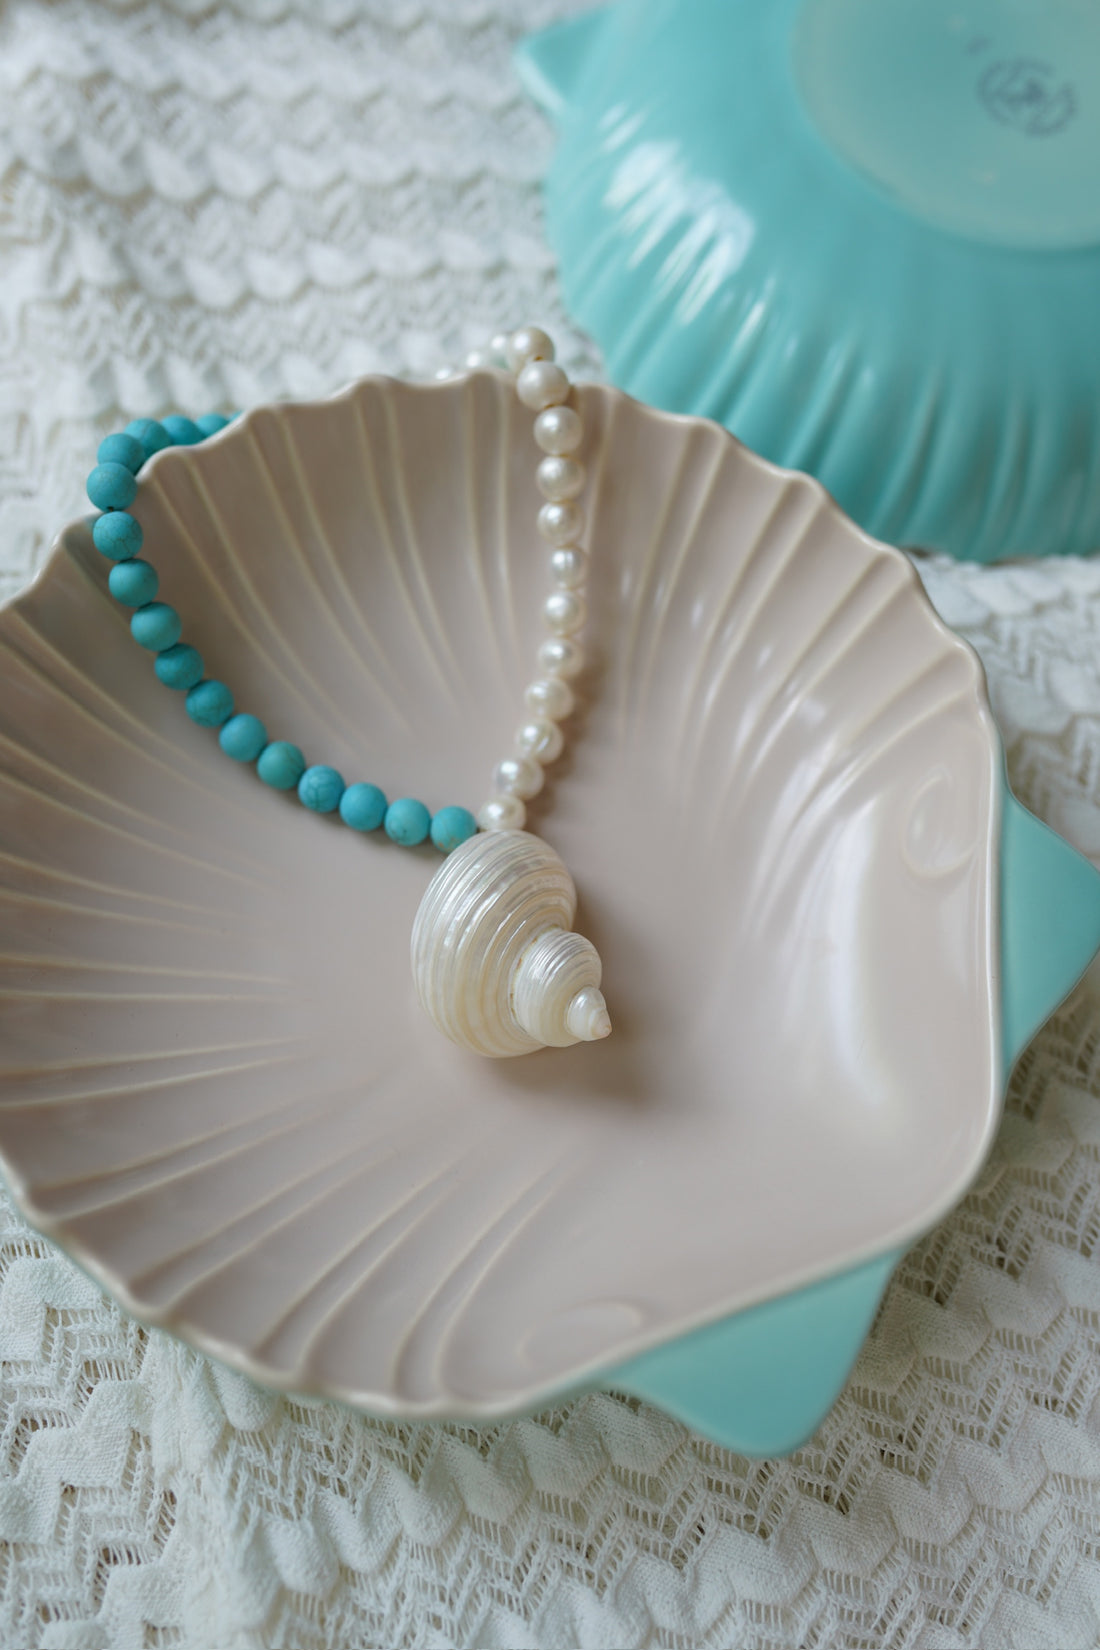 Limited Edition: Freshwater Pearl & Turquoise Seashell Necklace